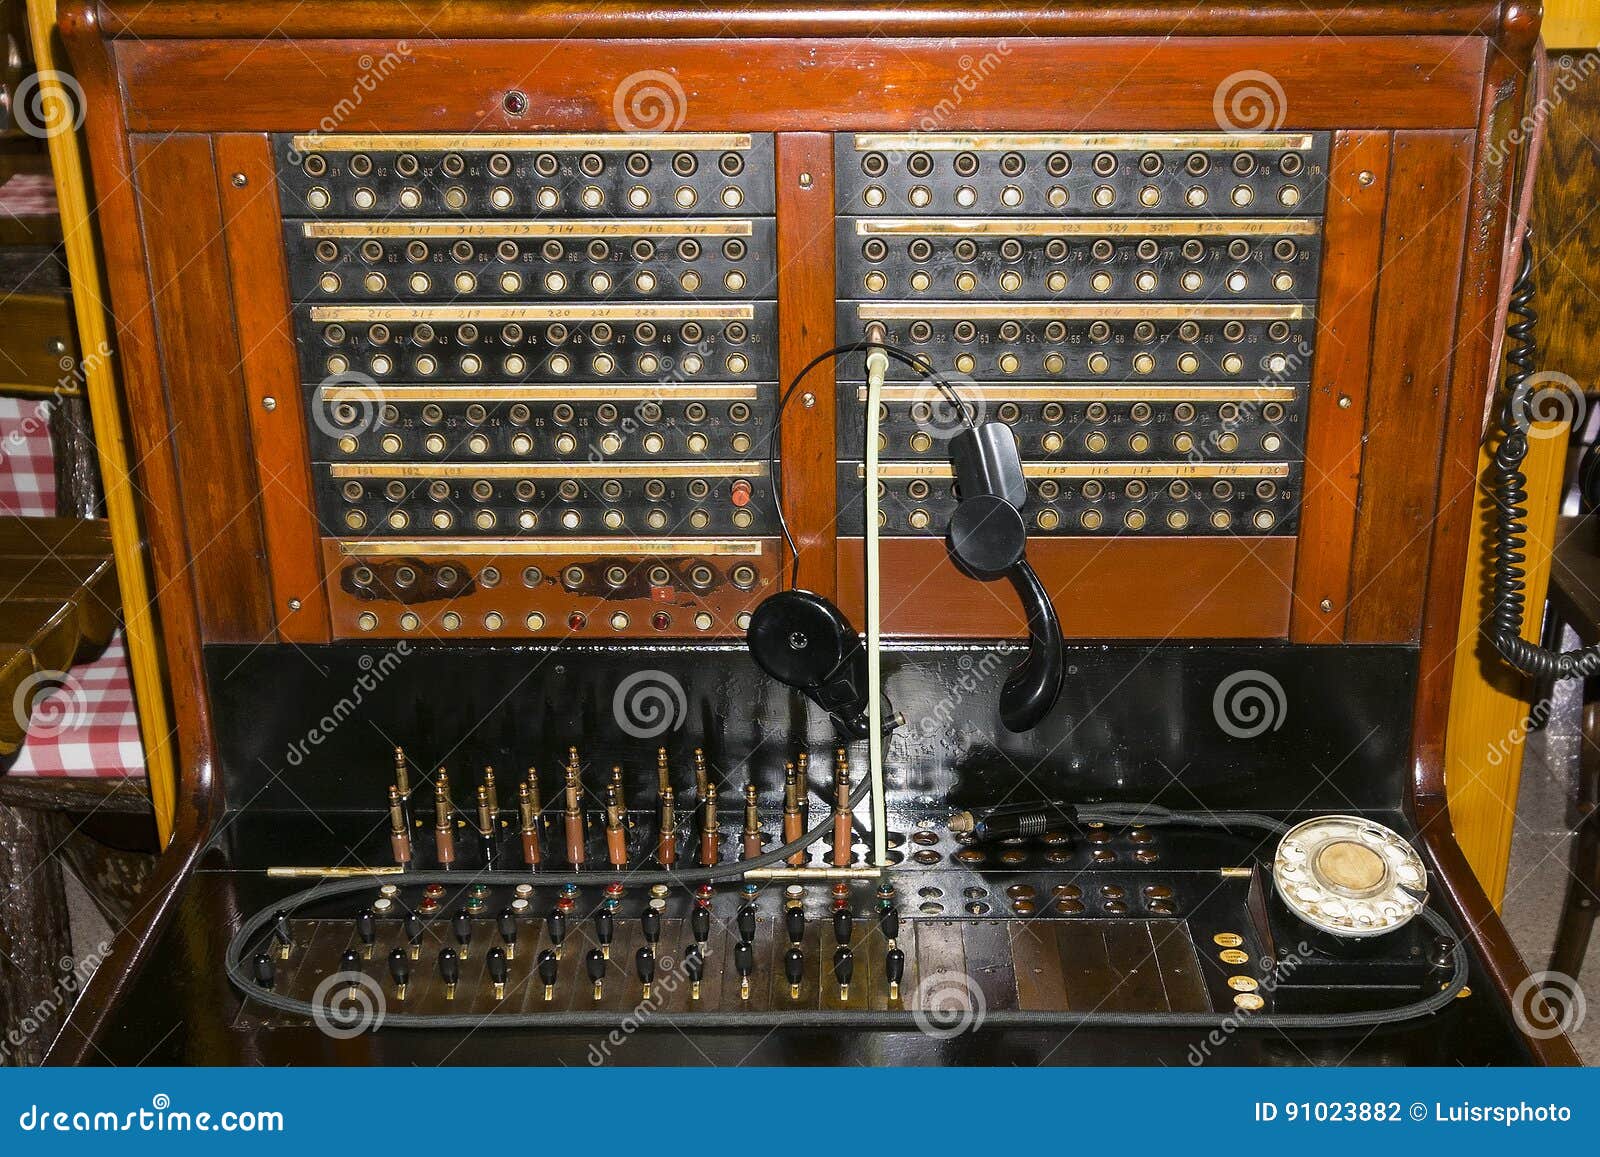 antique telephone switchboard